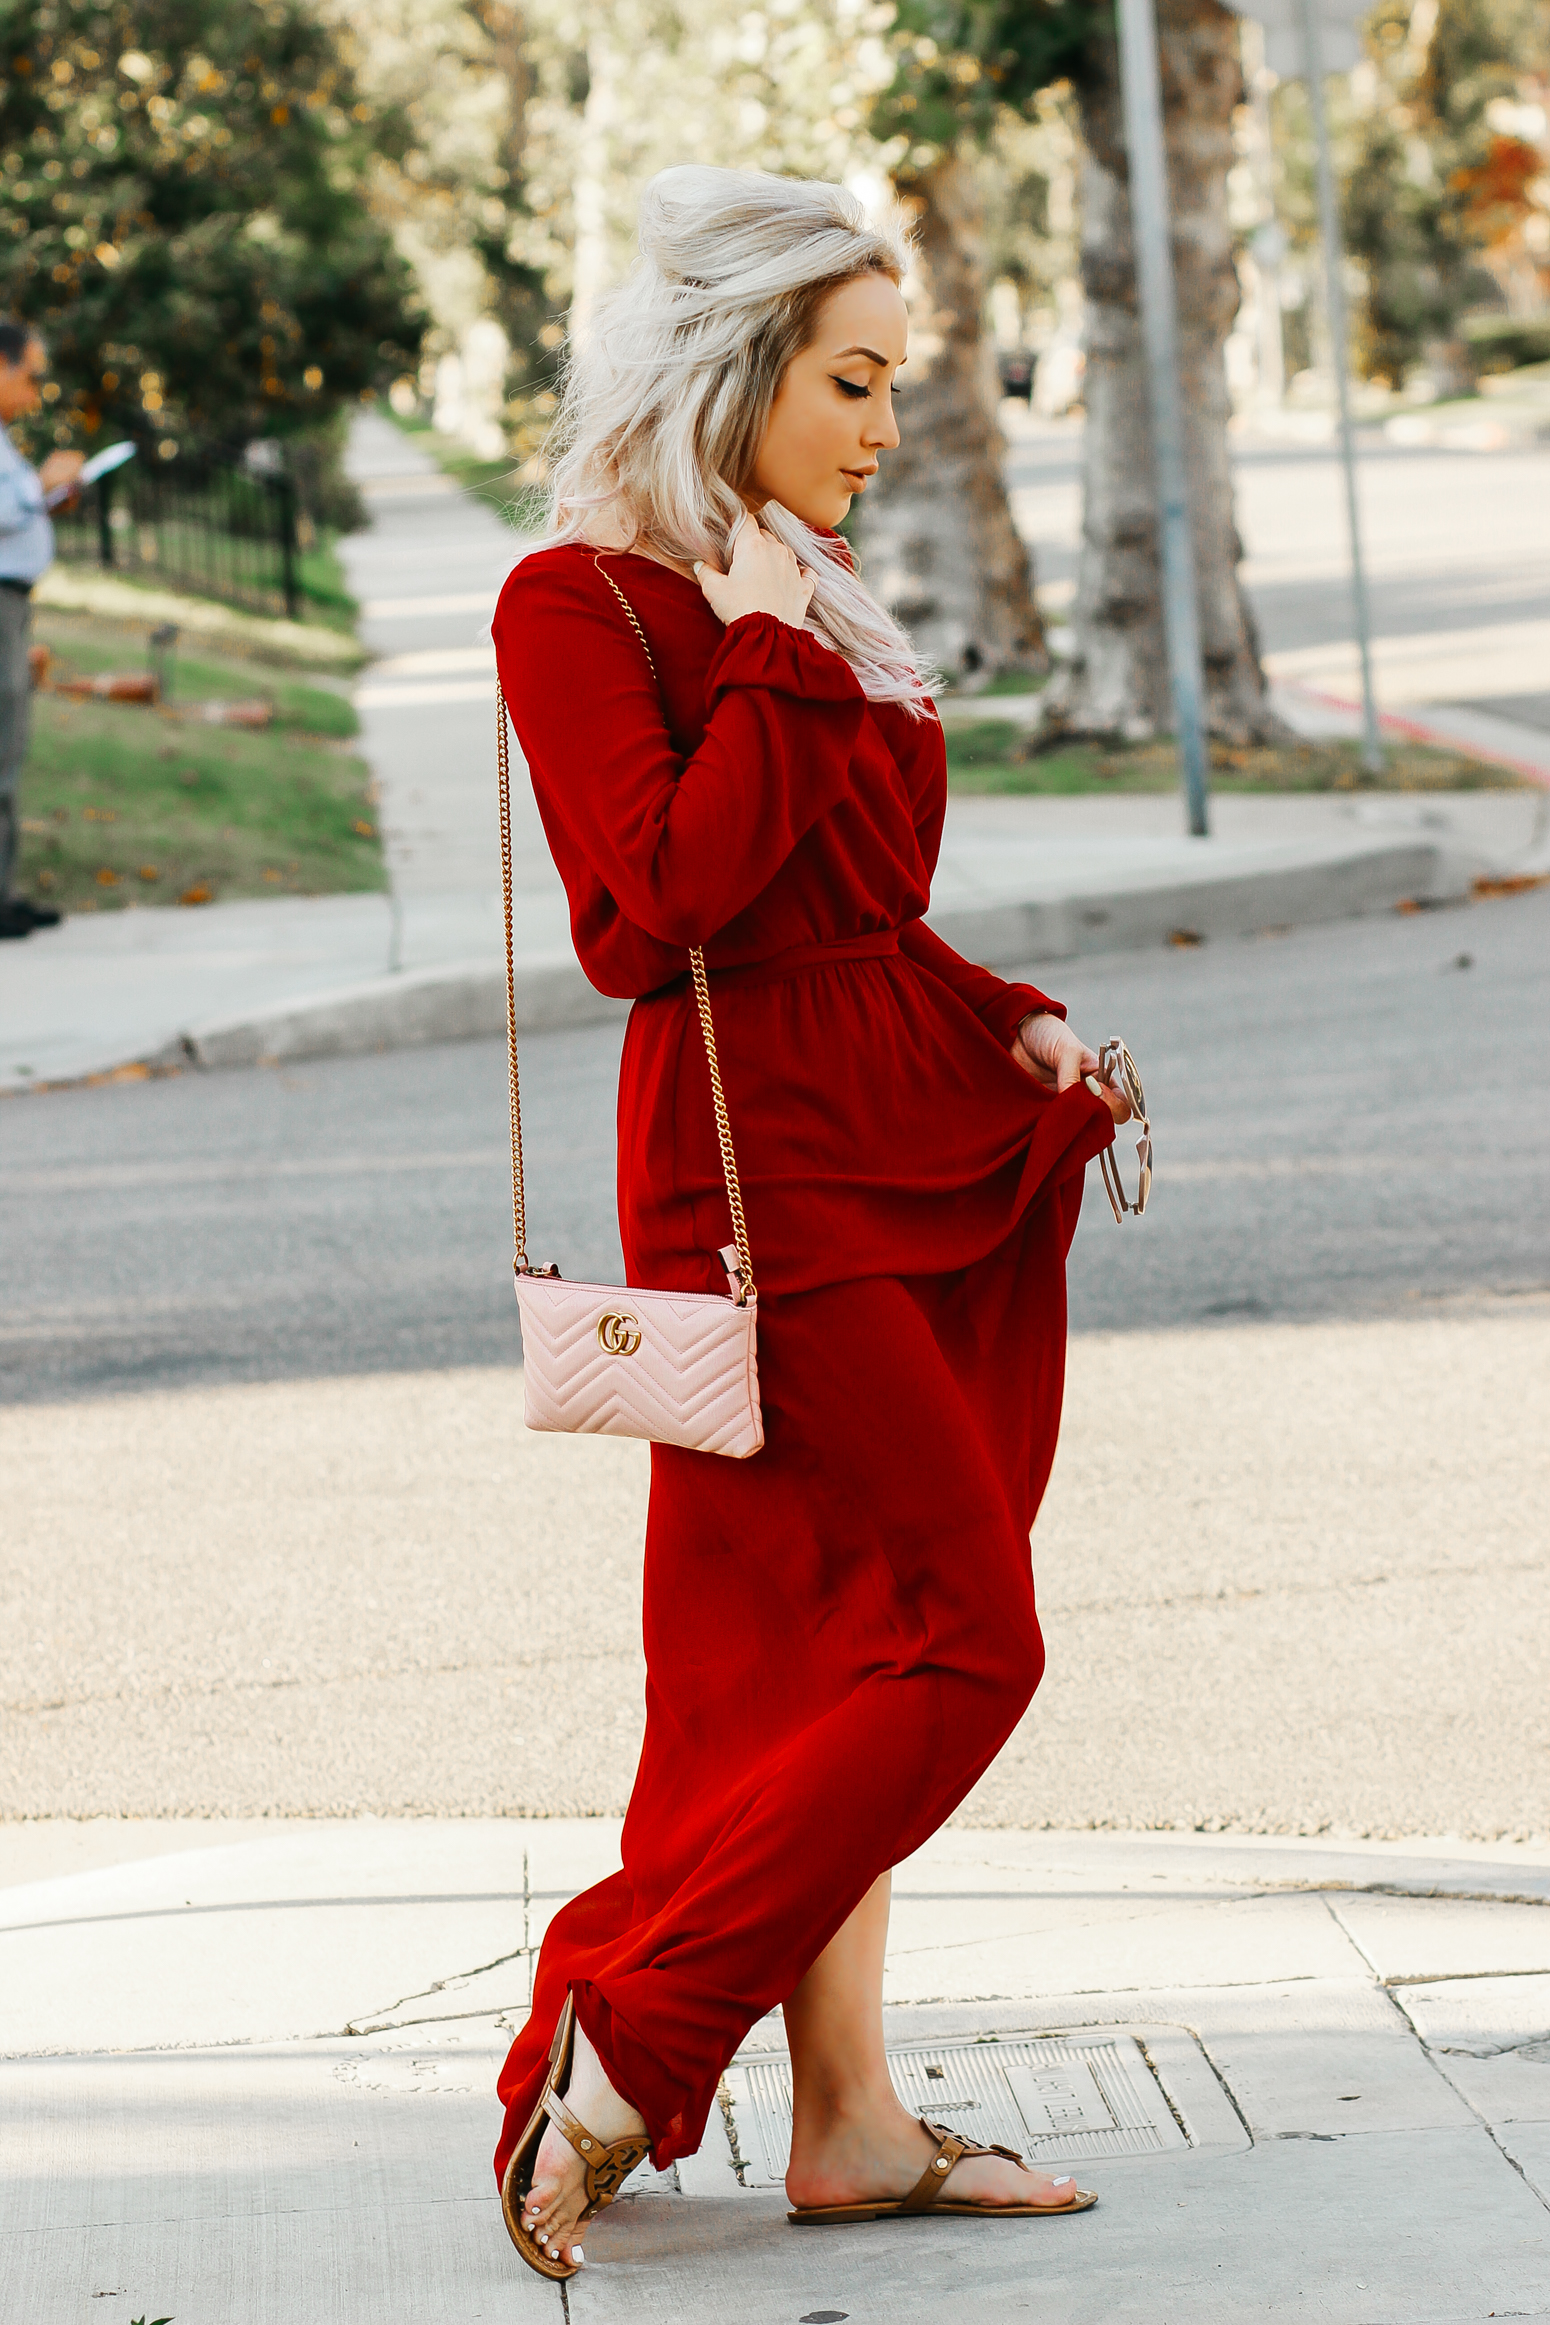 Blondie in the City | Sheer Red Maxi Dress w/ pink Gucci Bag